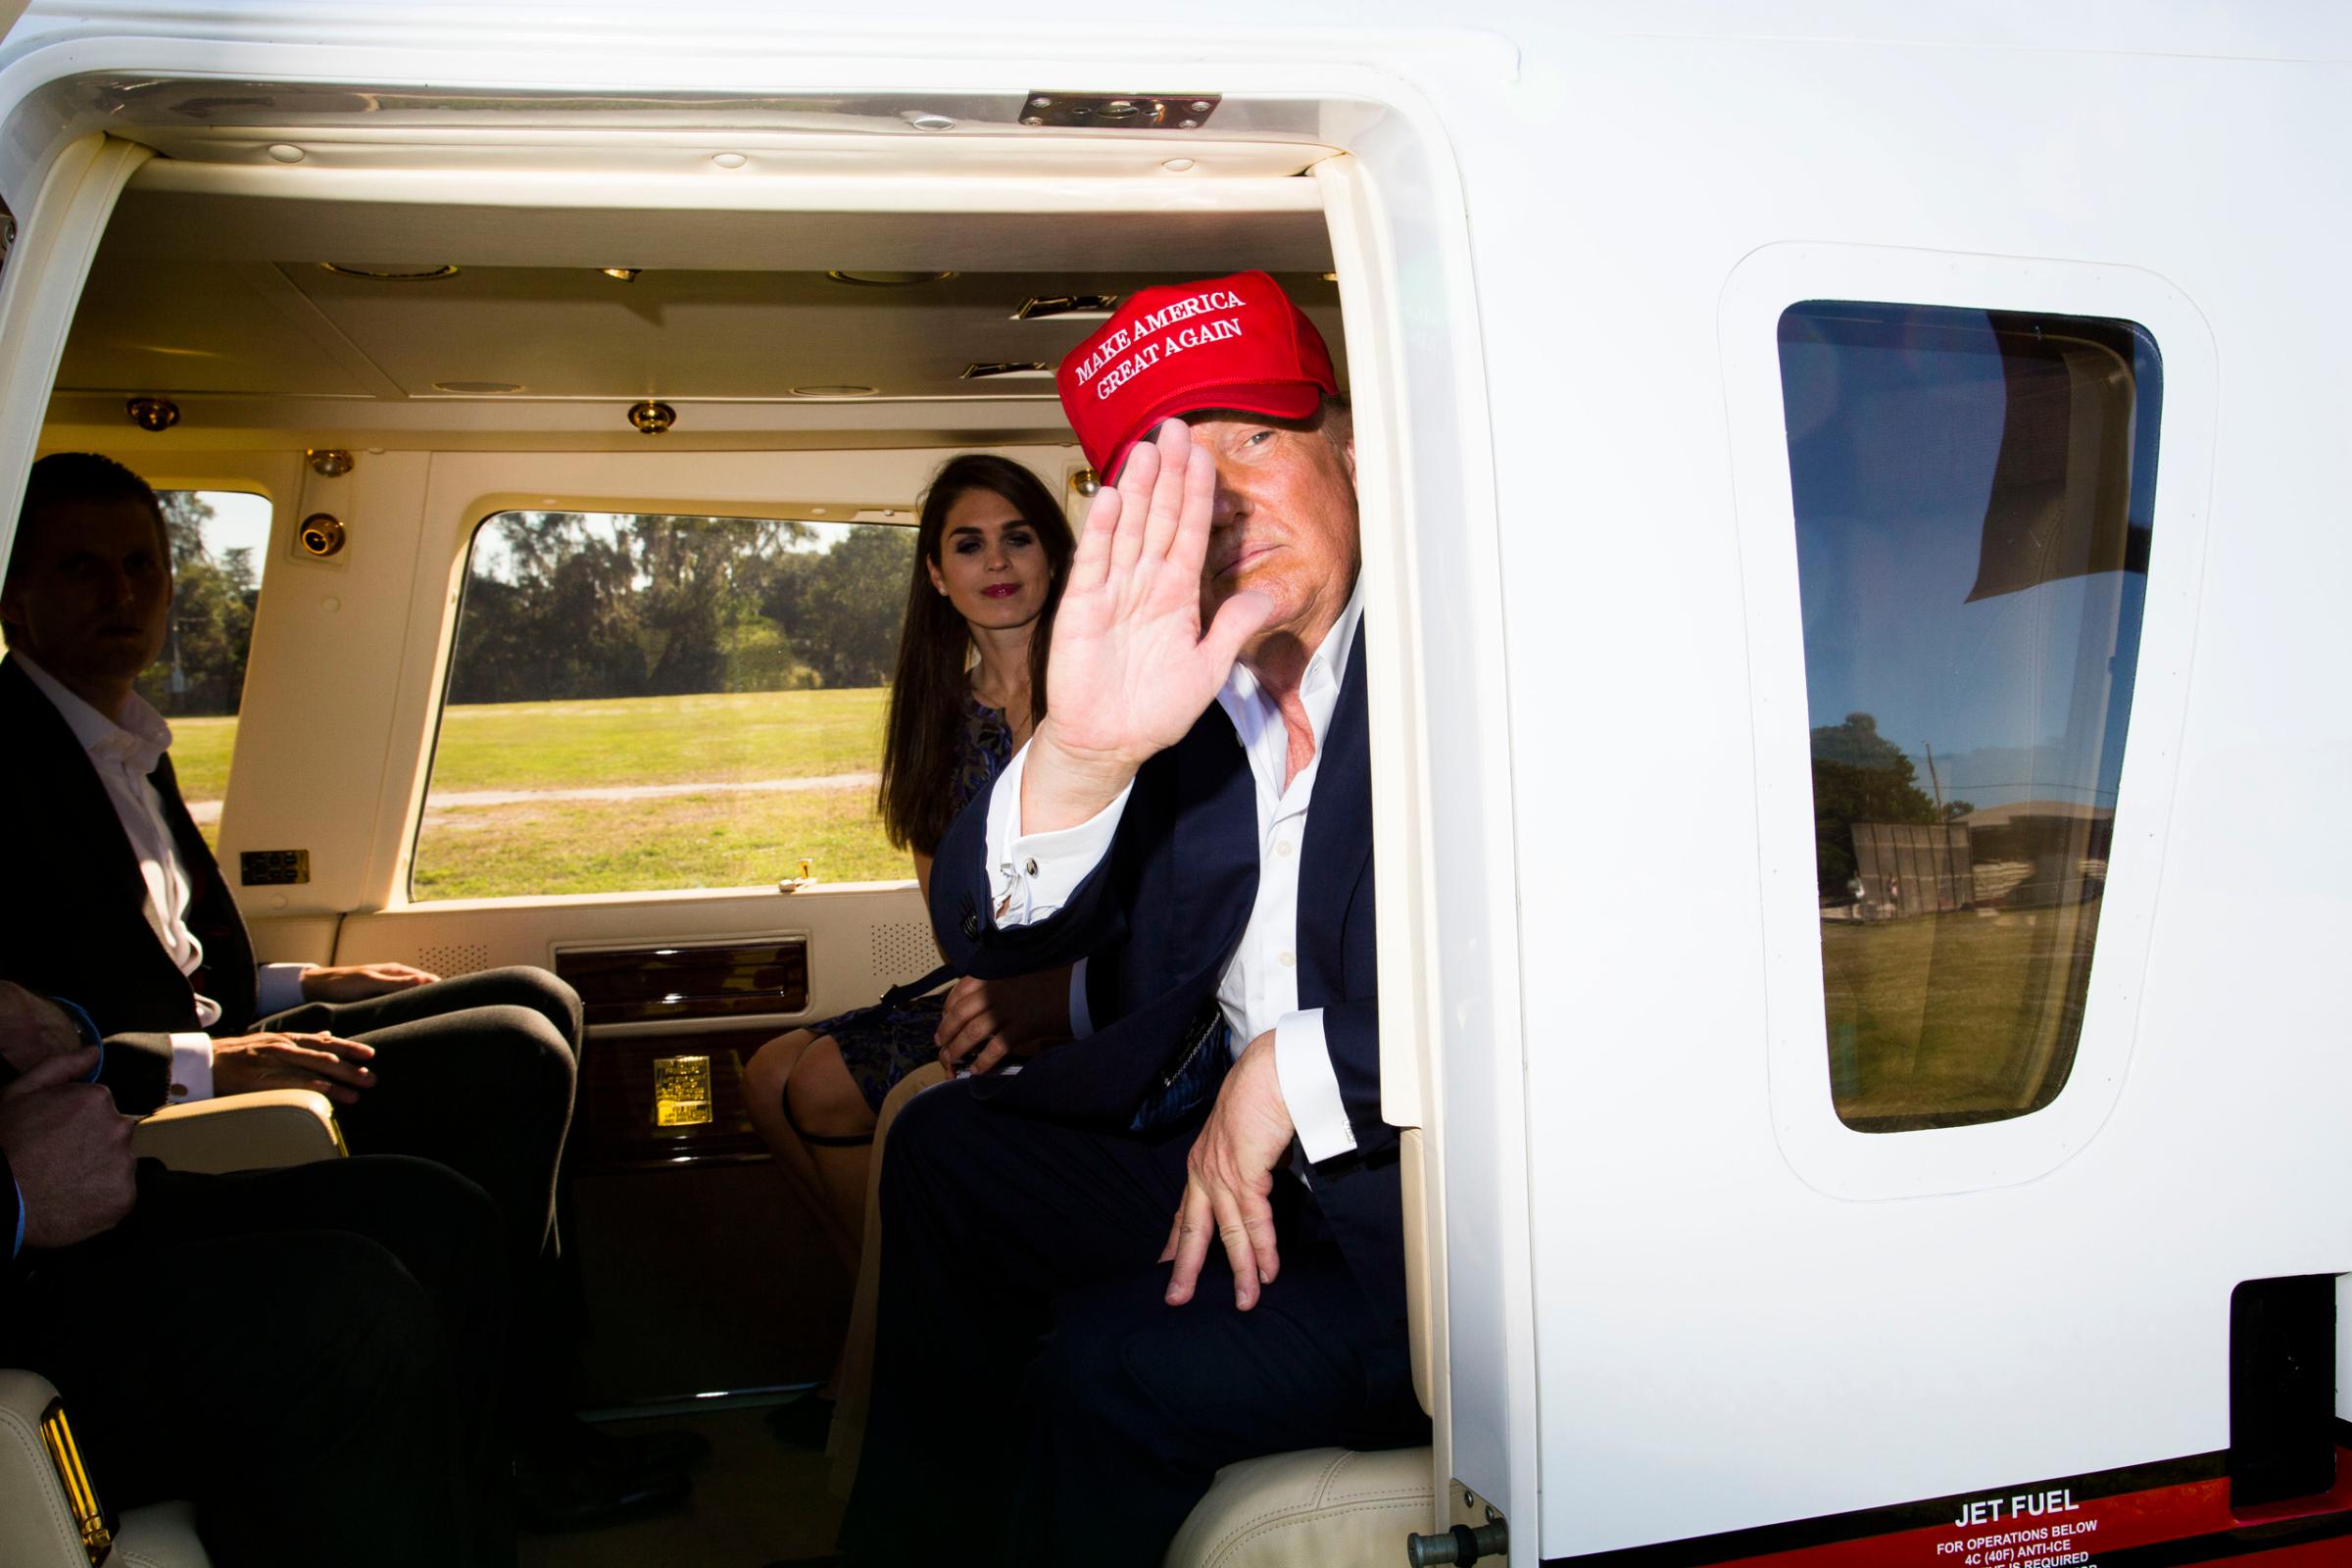 Donald Trump and his campaign staff prepare to depart from the Robarts Arena on Saturday after a campaign rally in Sarasota, Fla. Nov. 28, 2015.